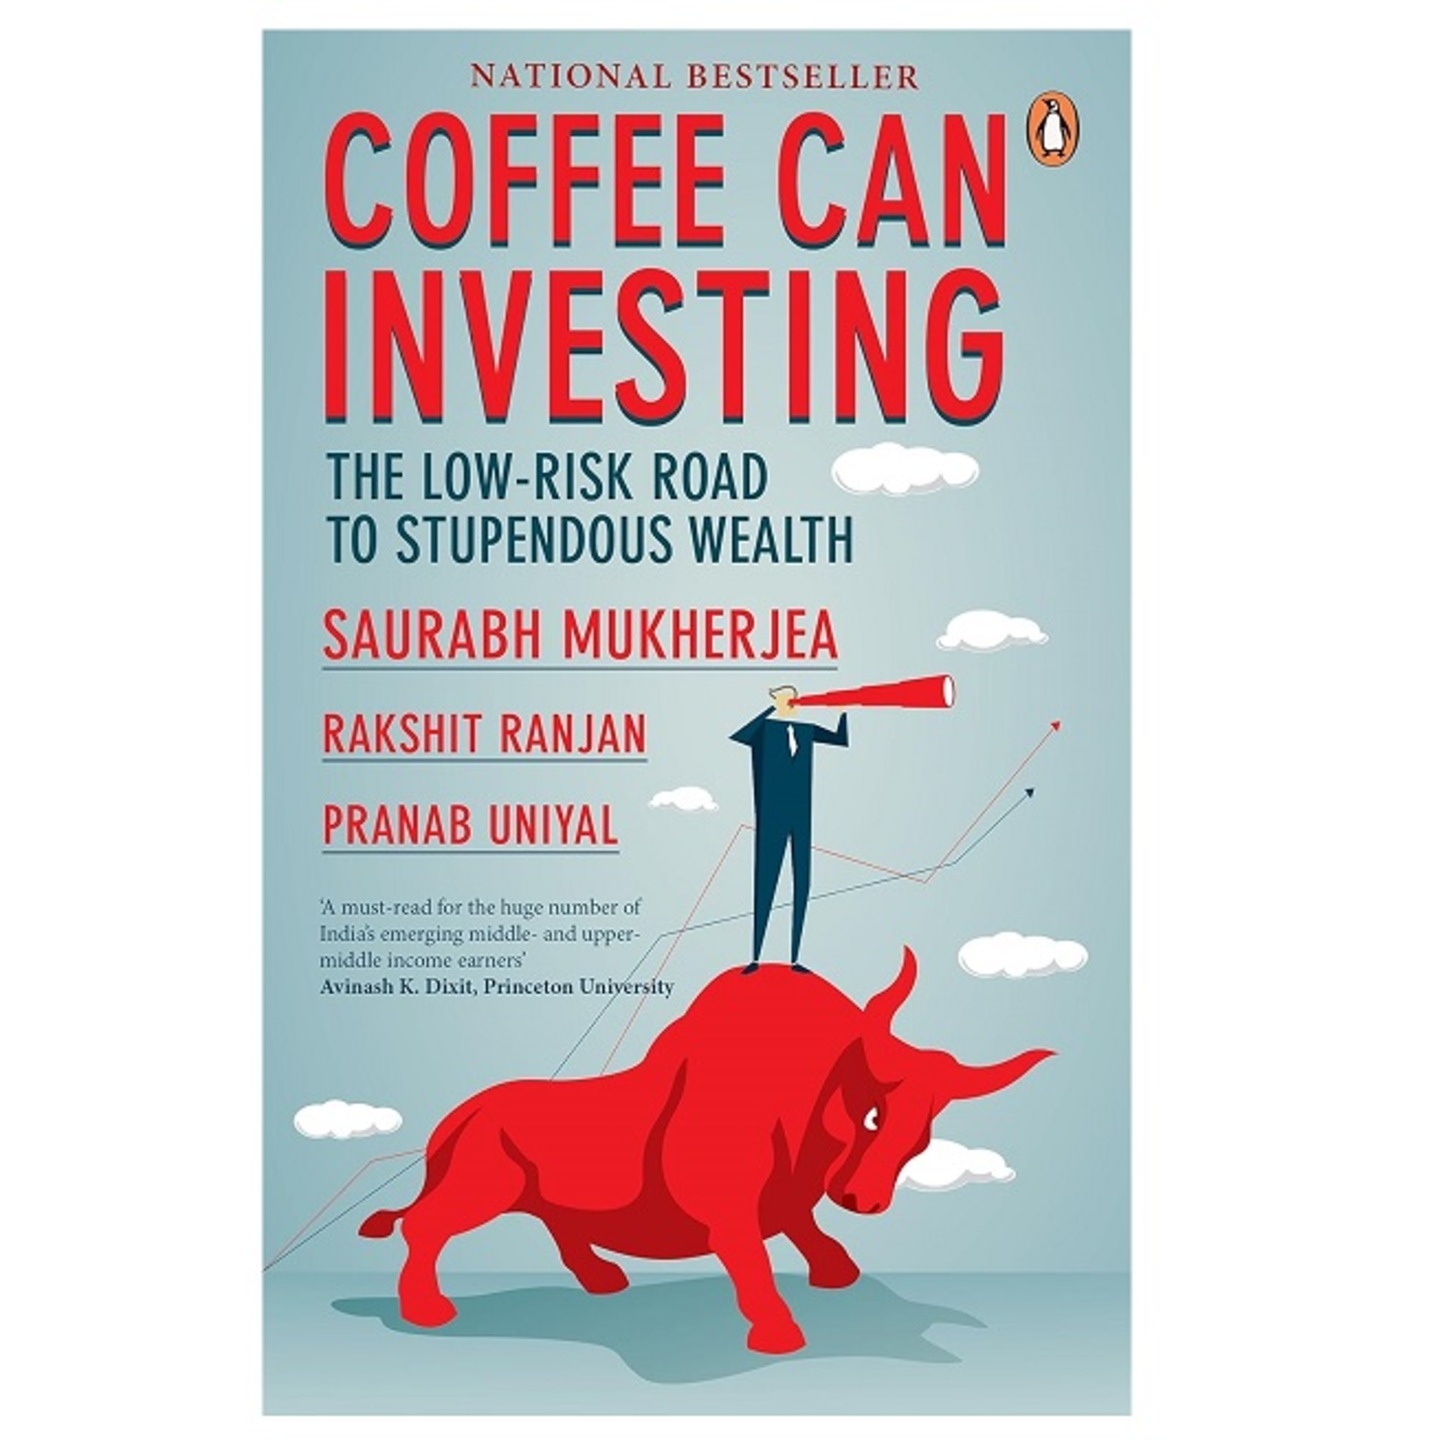 Book Coffee Can Investing The Low-Risk Road to Stupendous Wealth